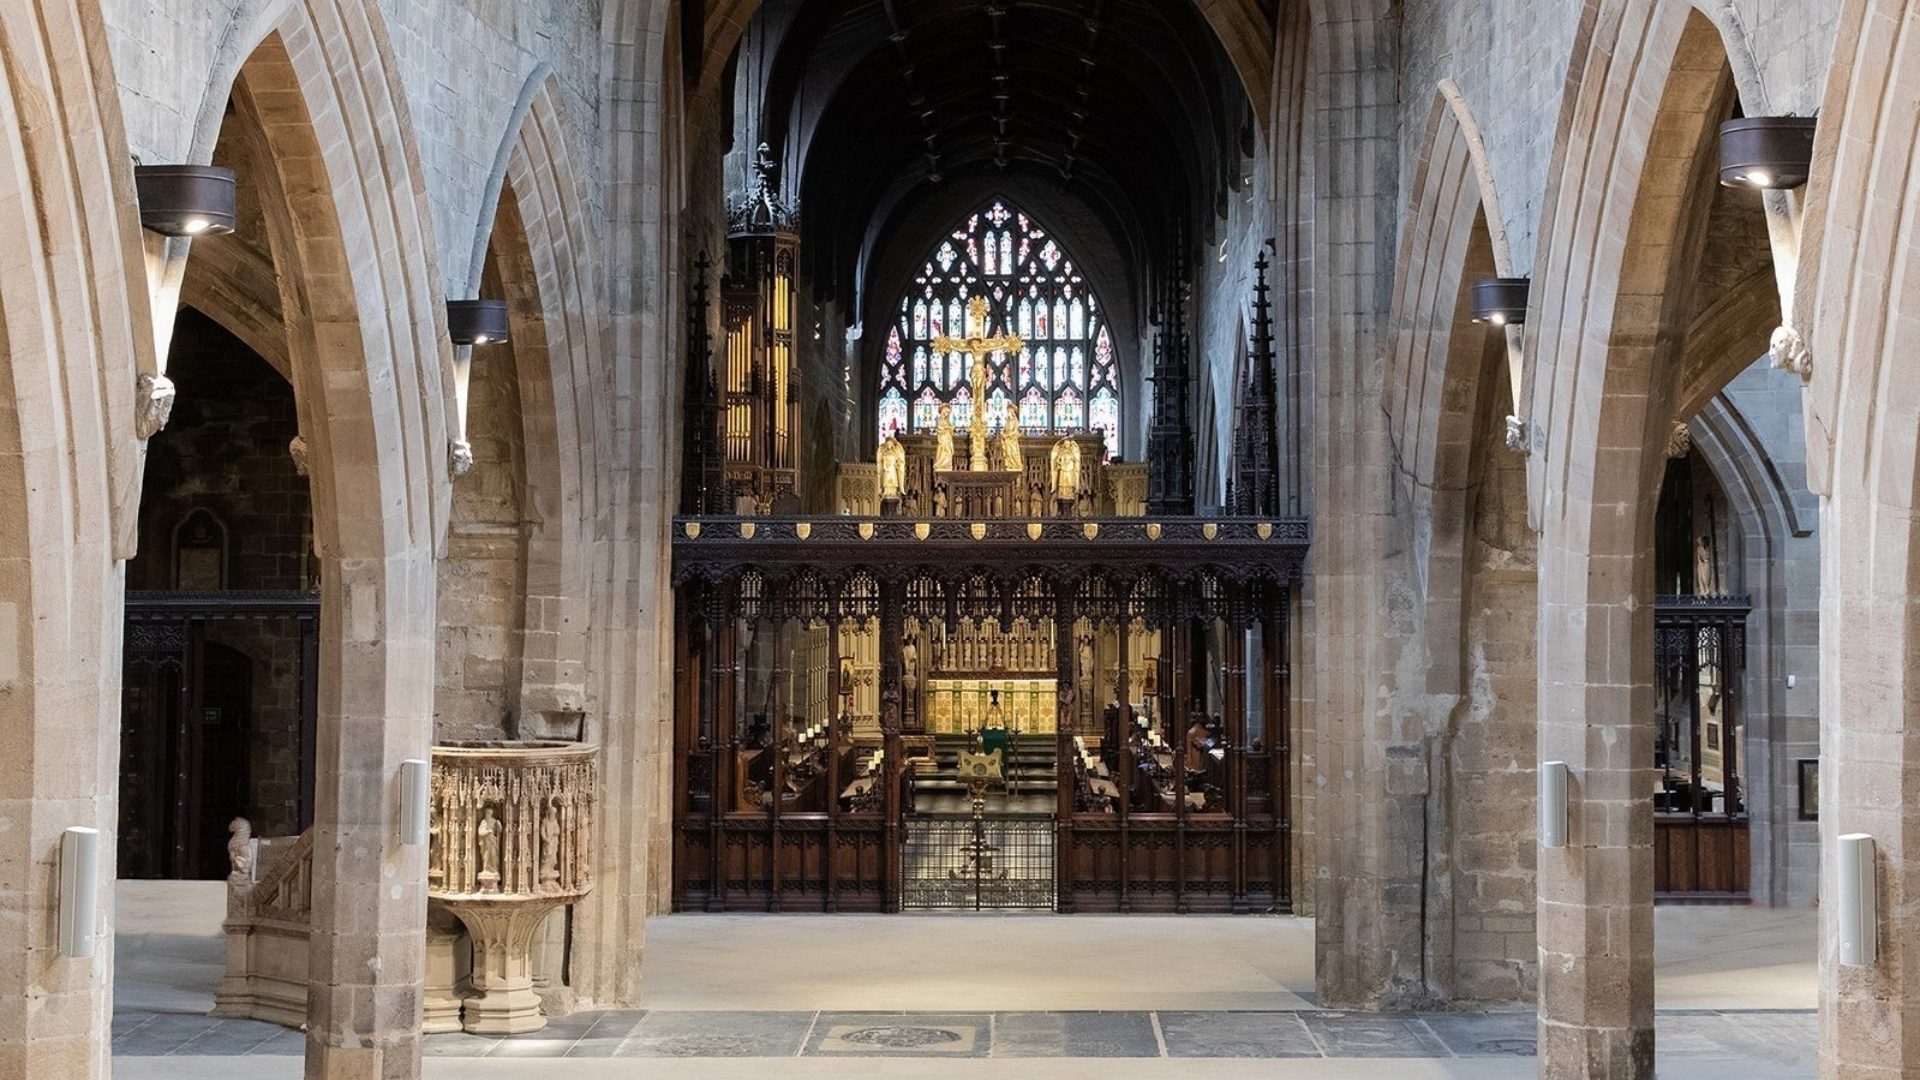 The transformed Nave Newcastle Cathedral